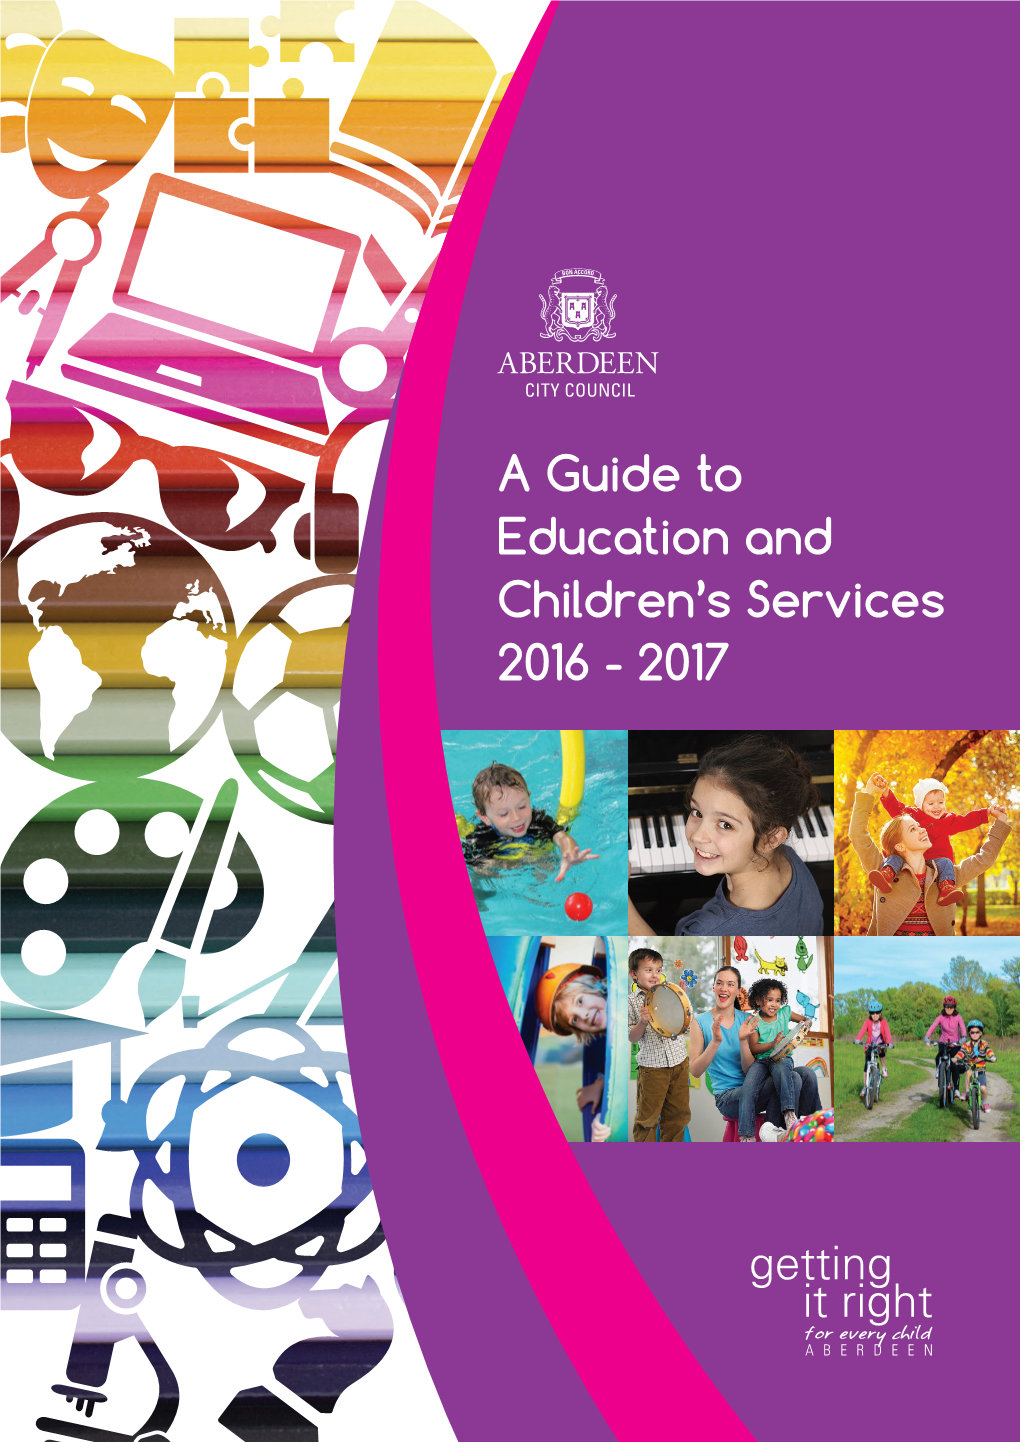 A Guide to Education and Children's Services 2016